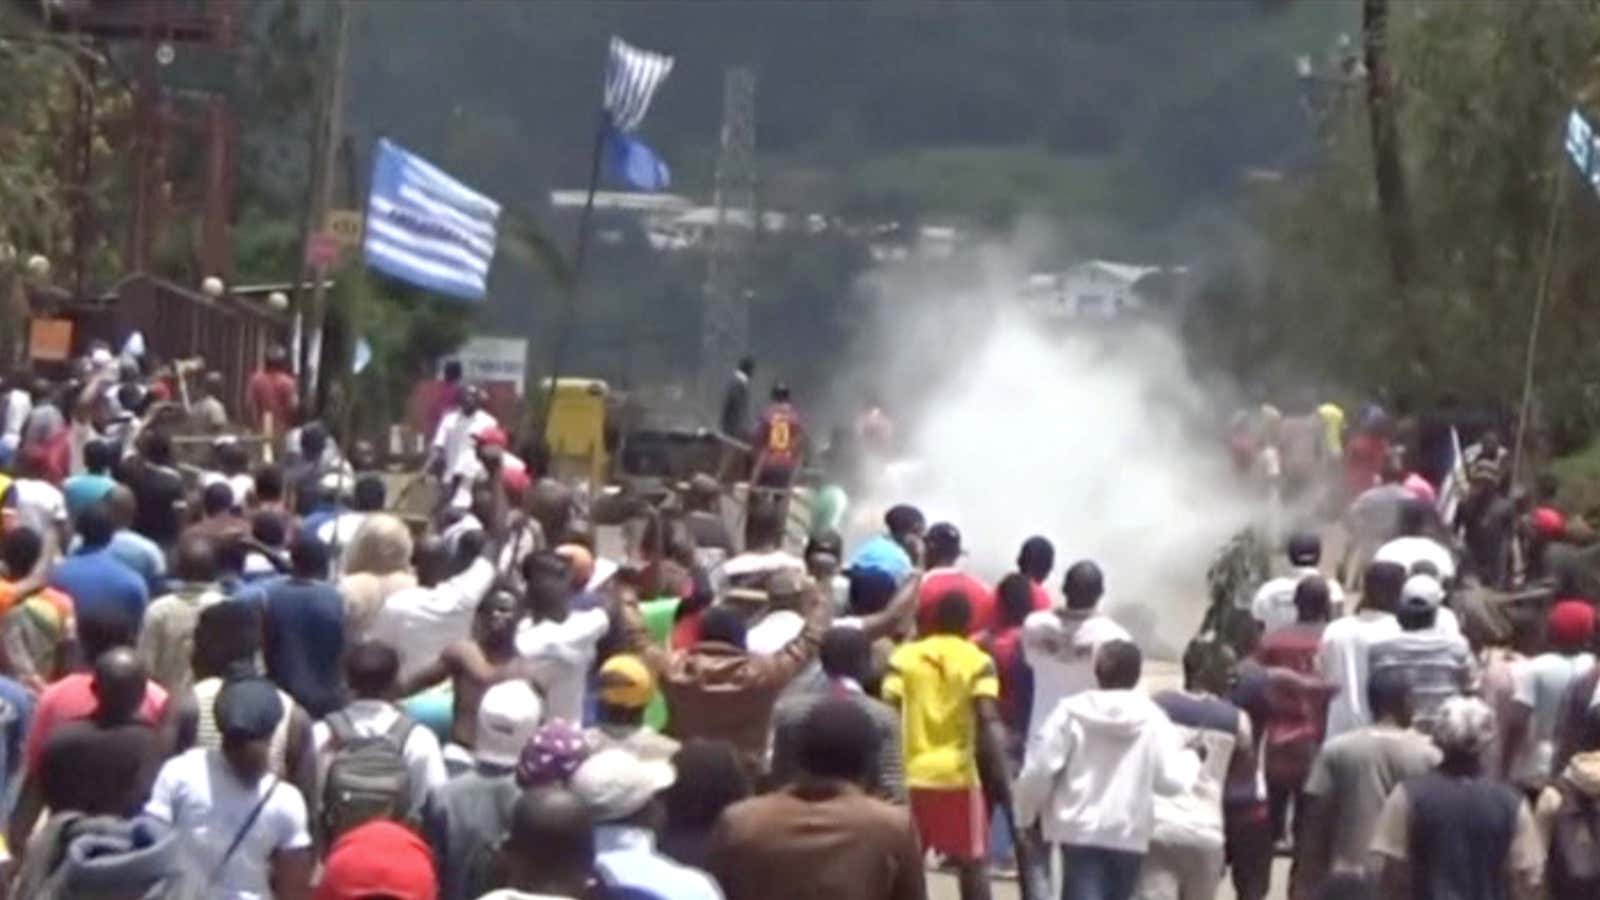 Protesters waving separatist Ambazonian flags amid police tear gas in the English-speaking city of Bamenda, Cameroon.